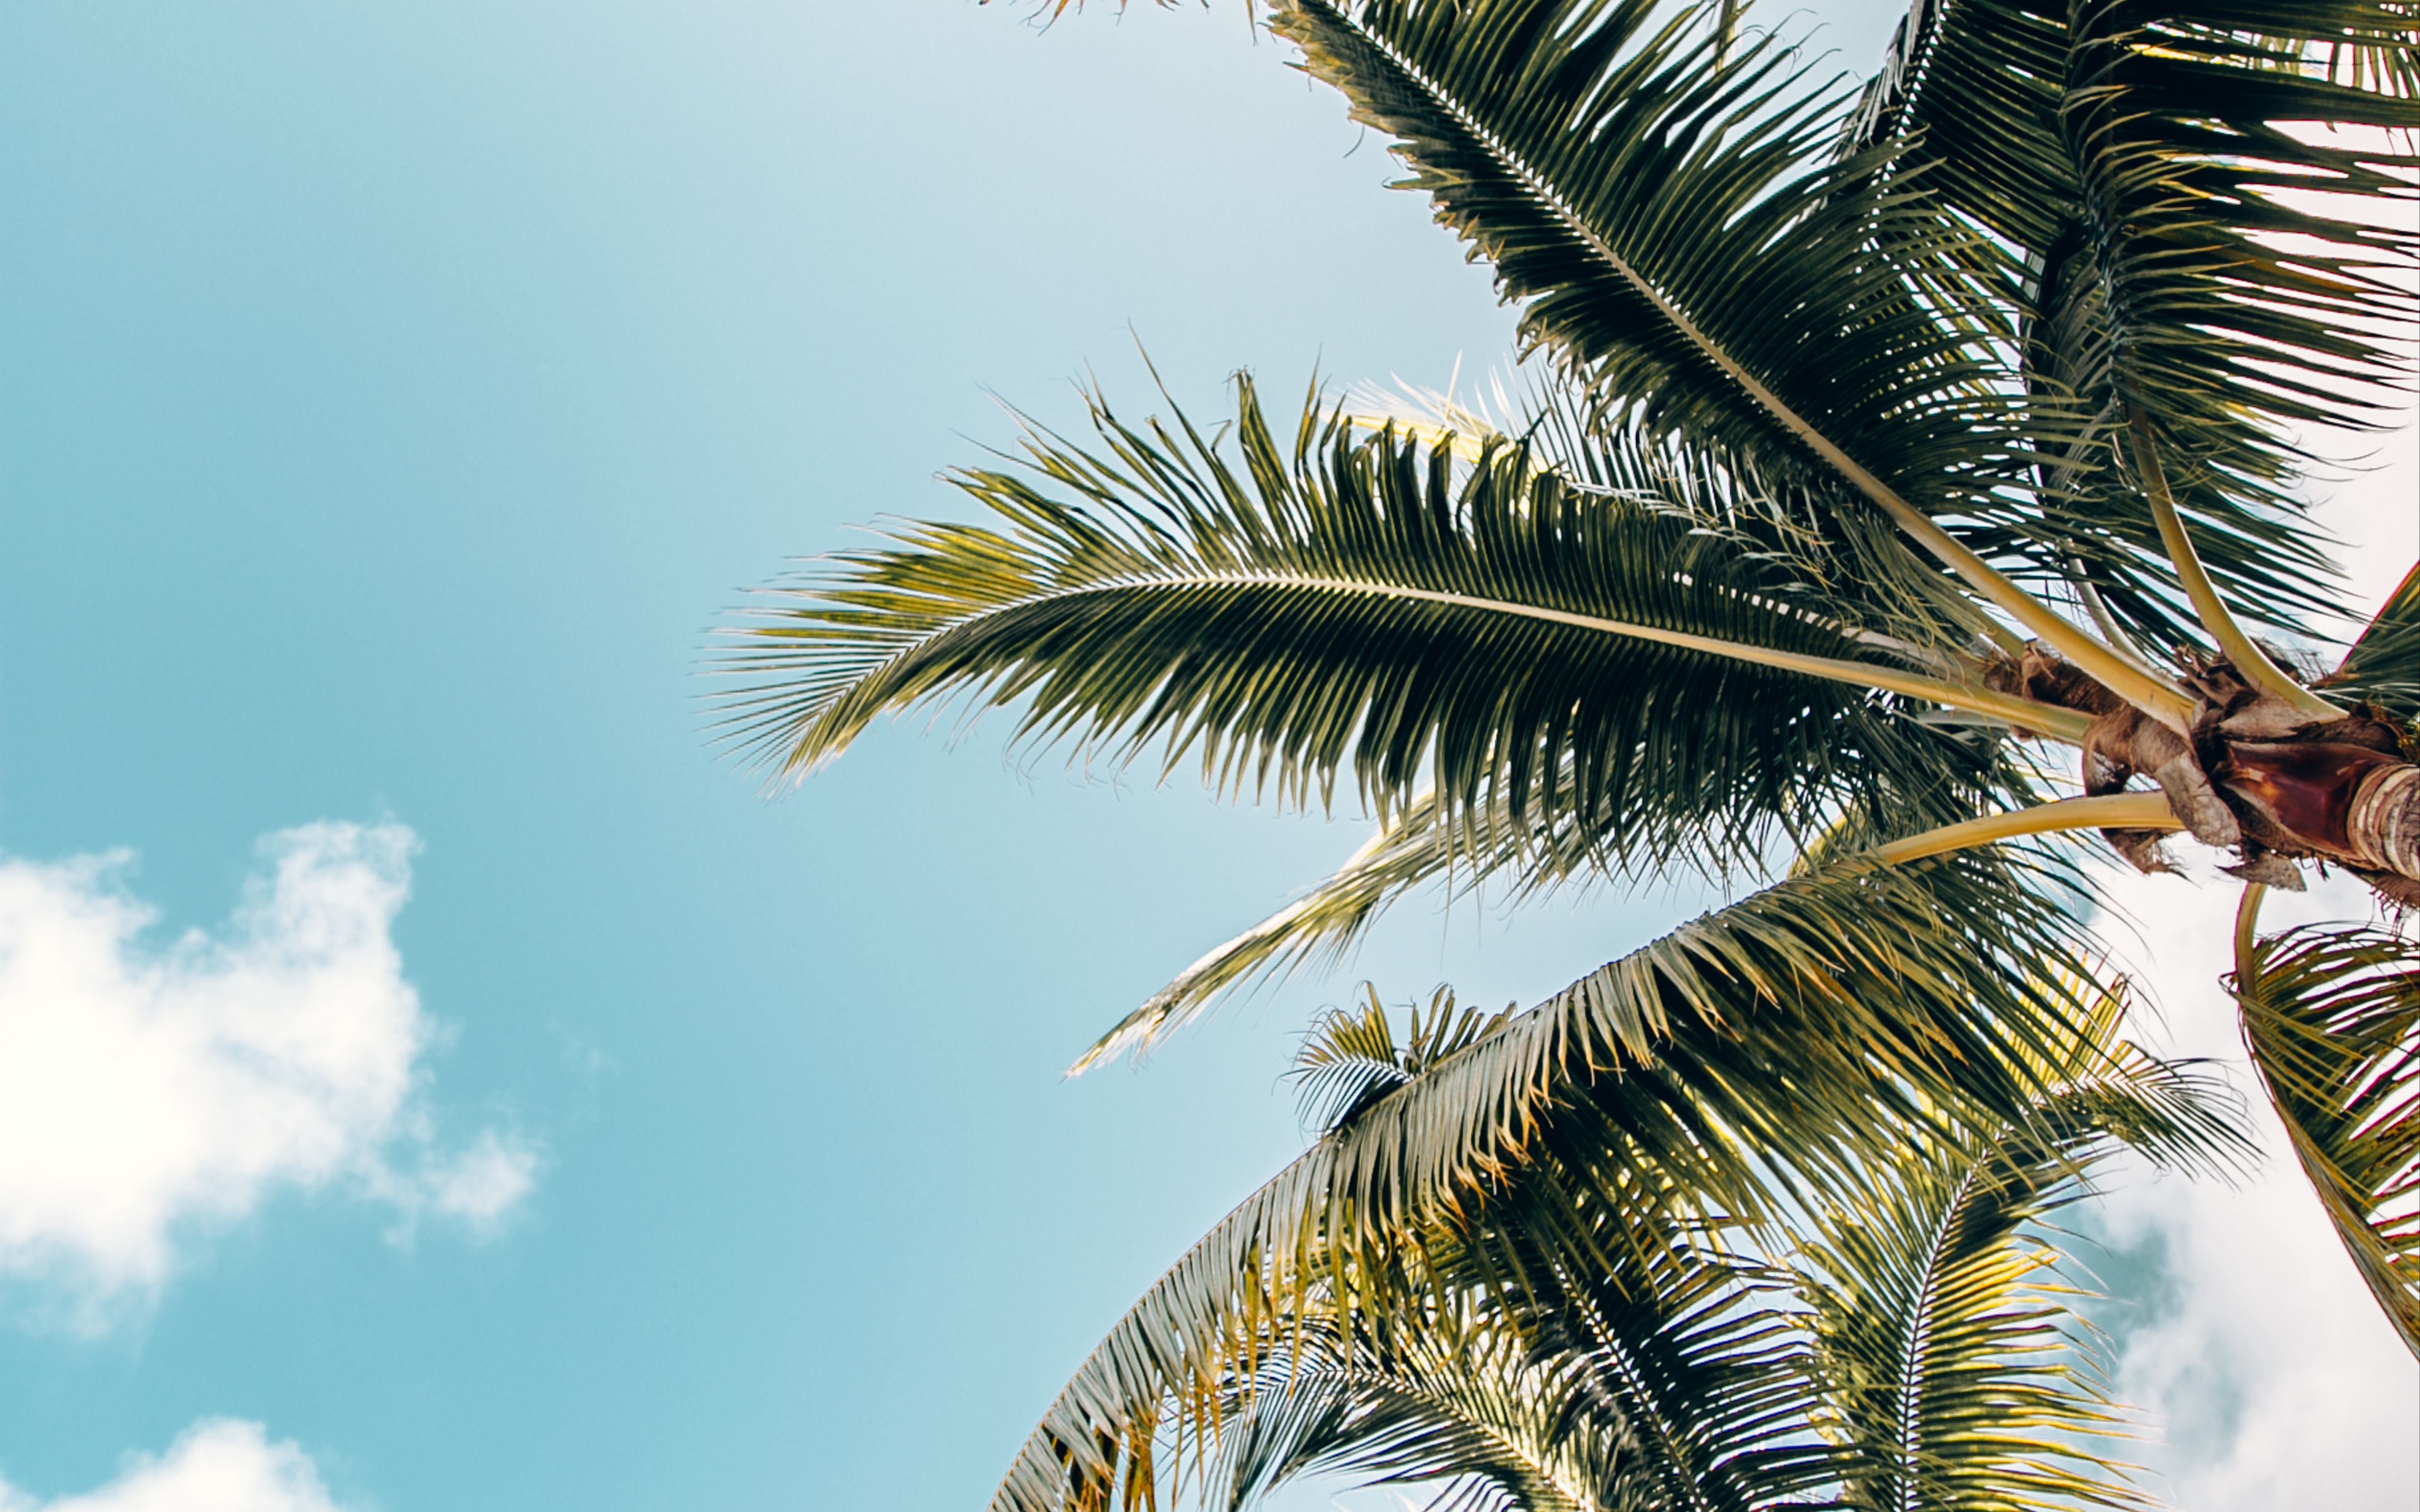 Download wallpaper 3840x2400 palm trees, crowns, branches, leaves, sky ...